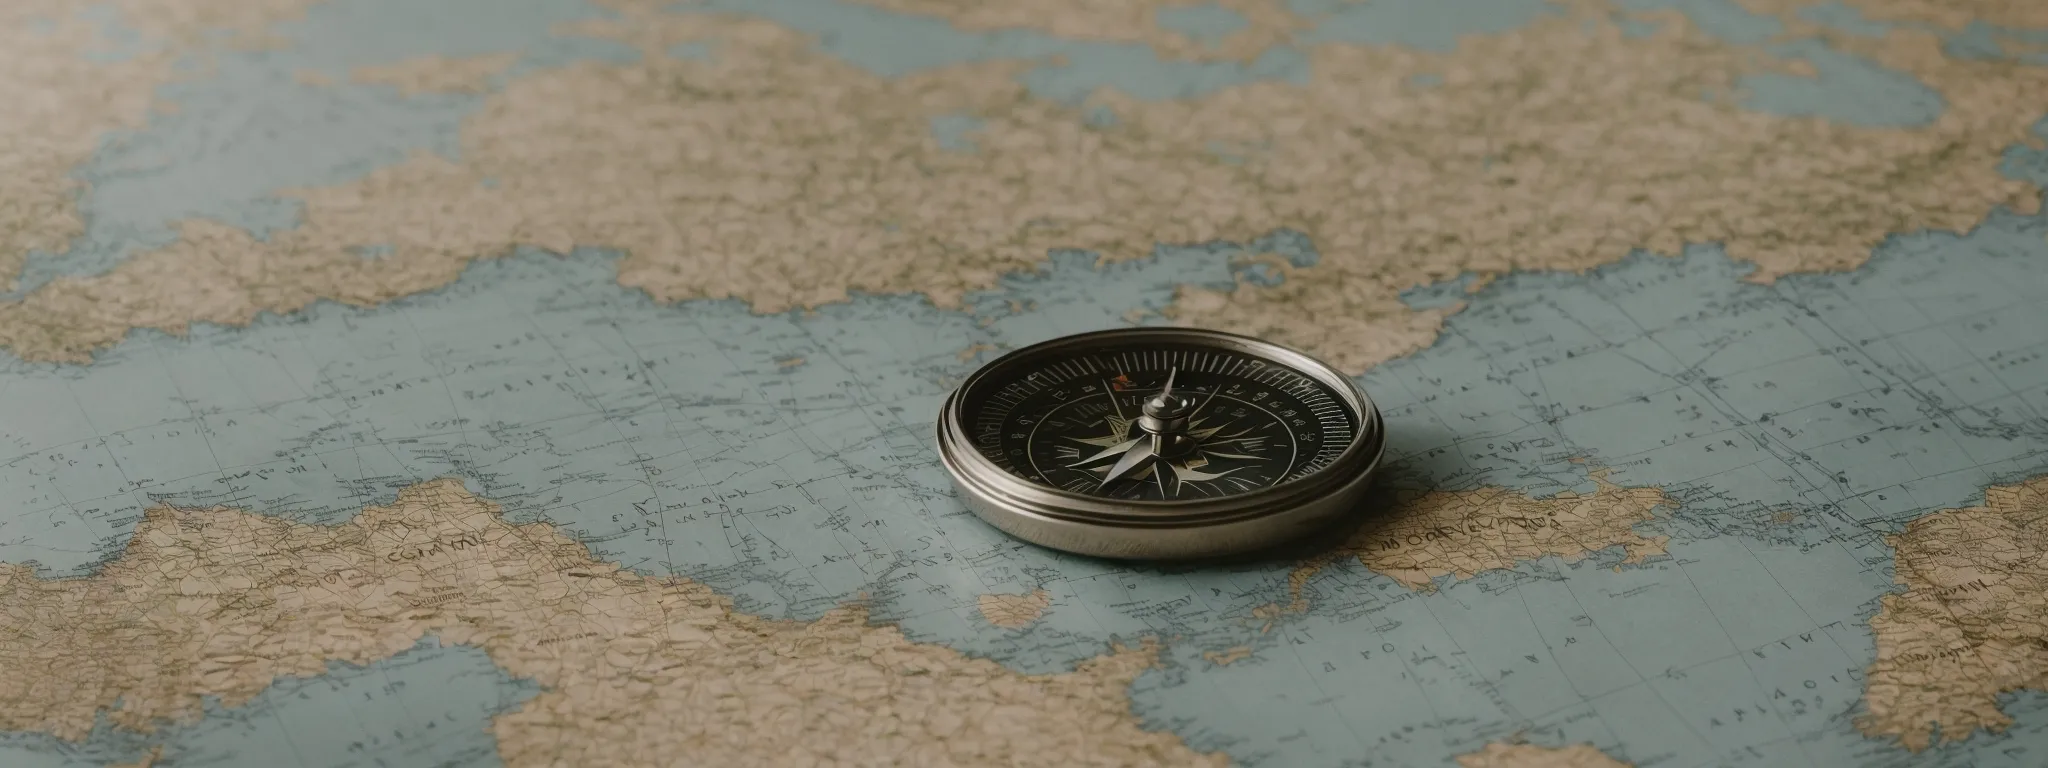 a compass resting atop a crisp map surrounded by navigational instruments, symbolizing strategic seo planning.